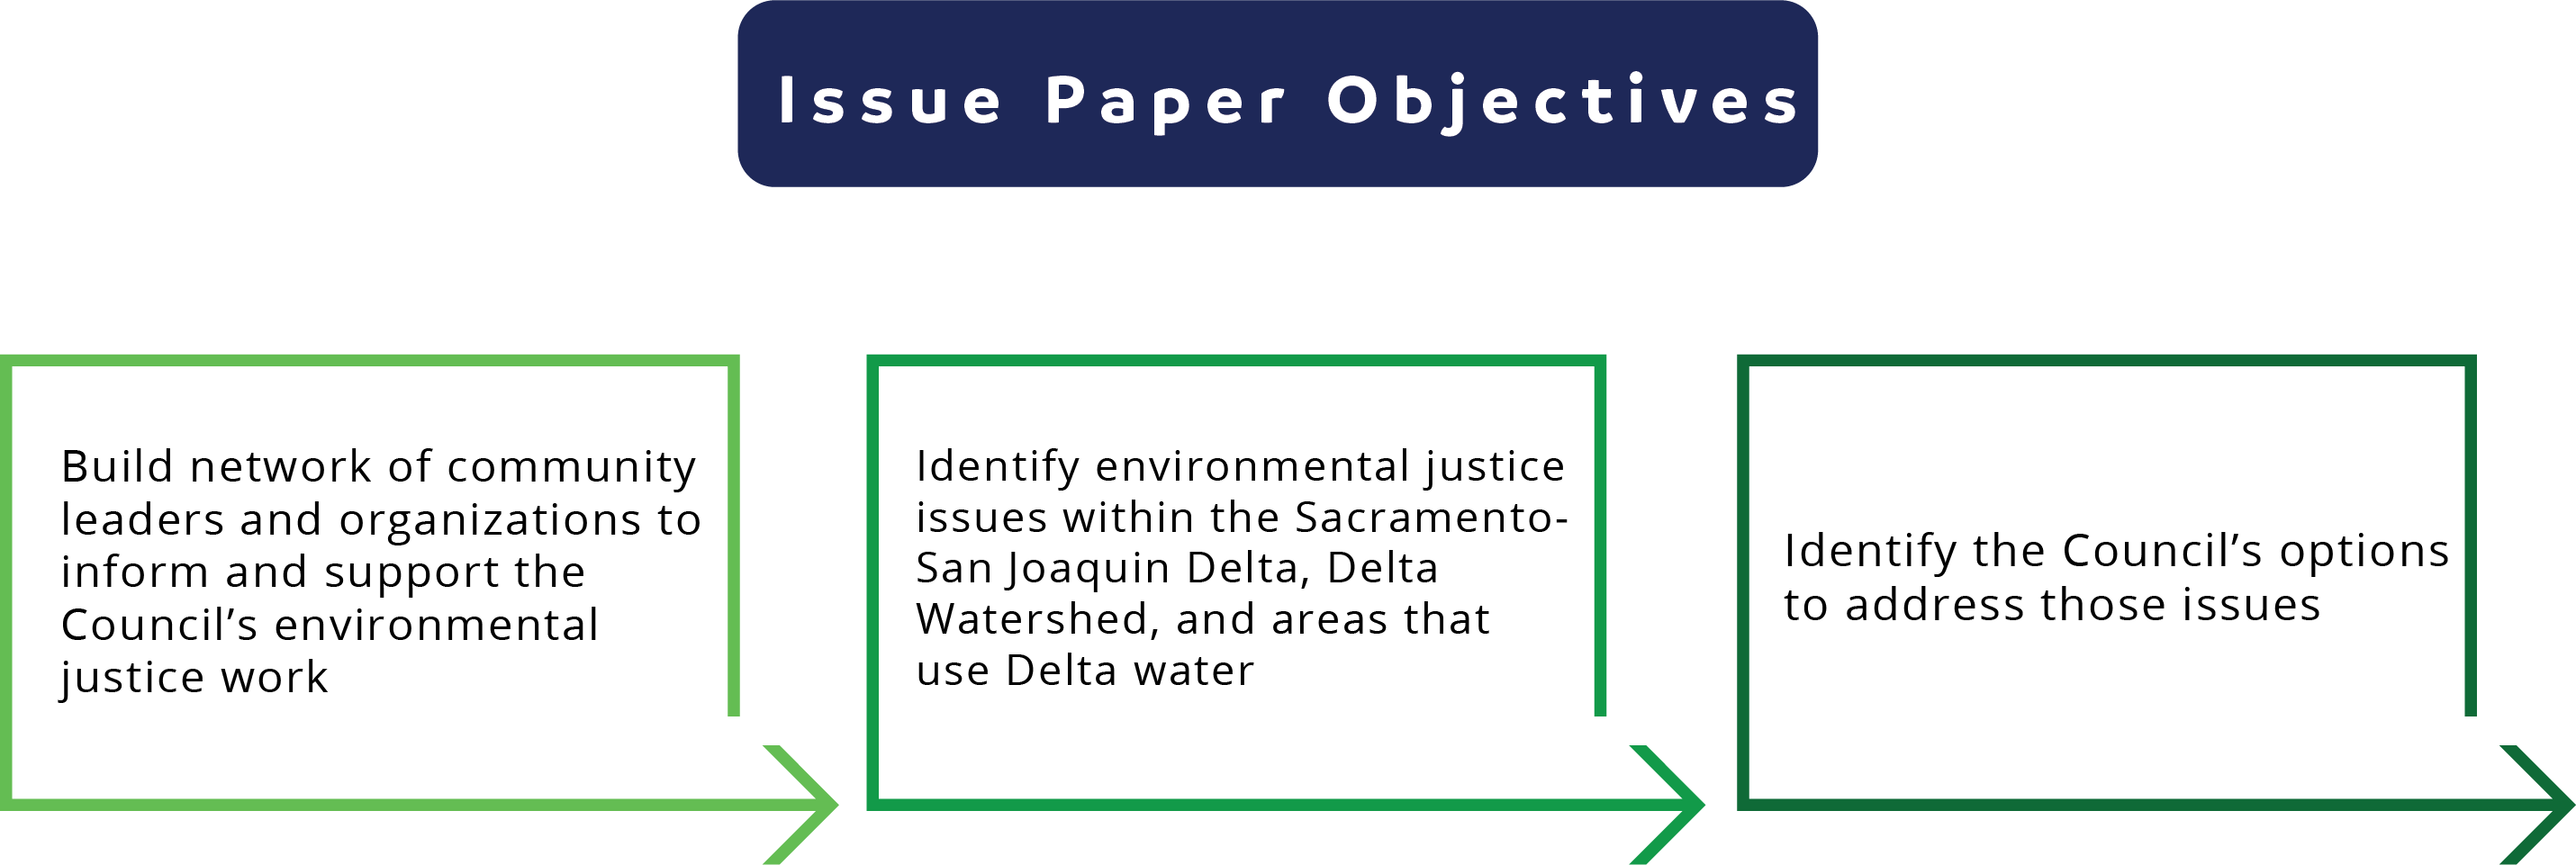 Environmental Justie Issue Paper Objectives.